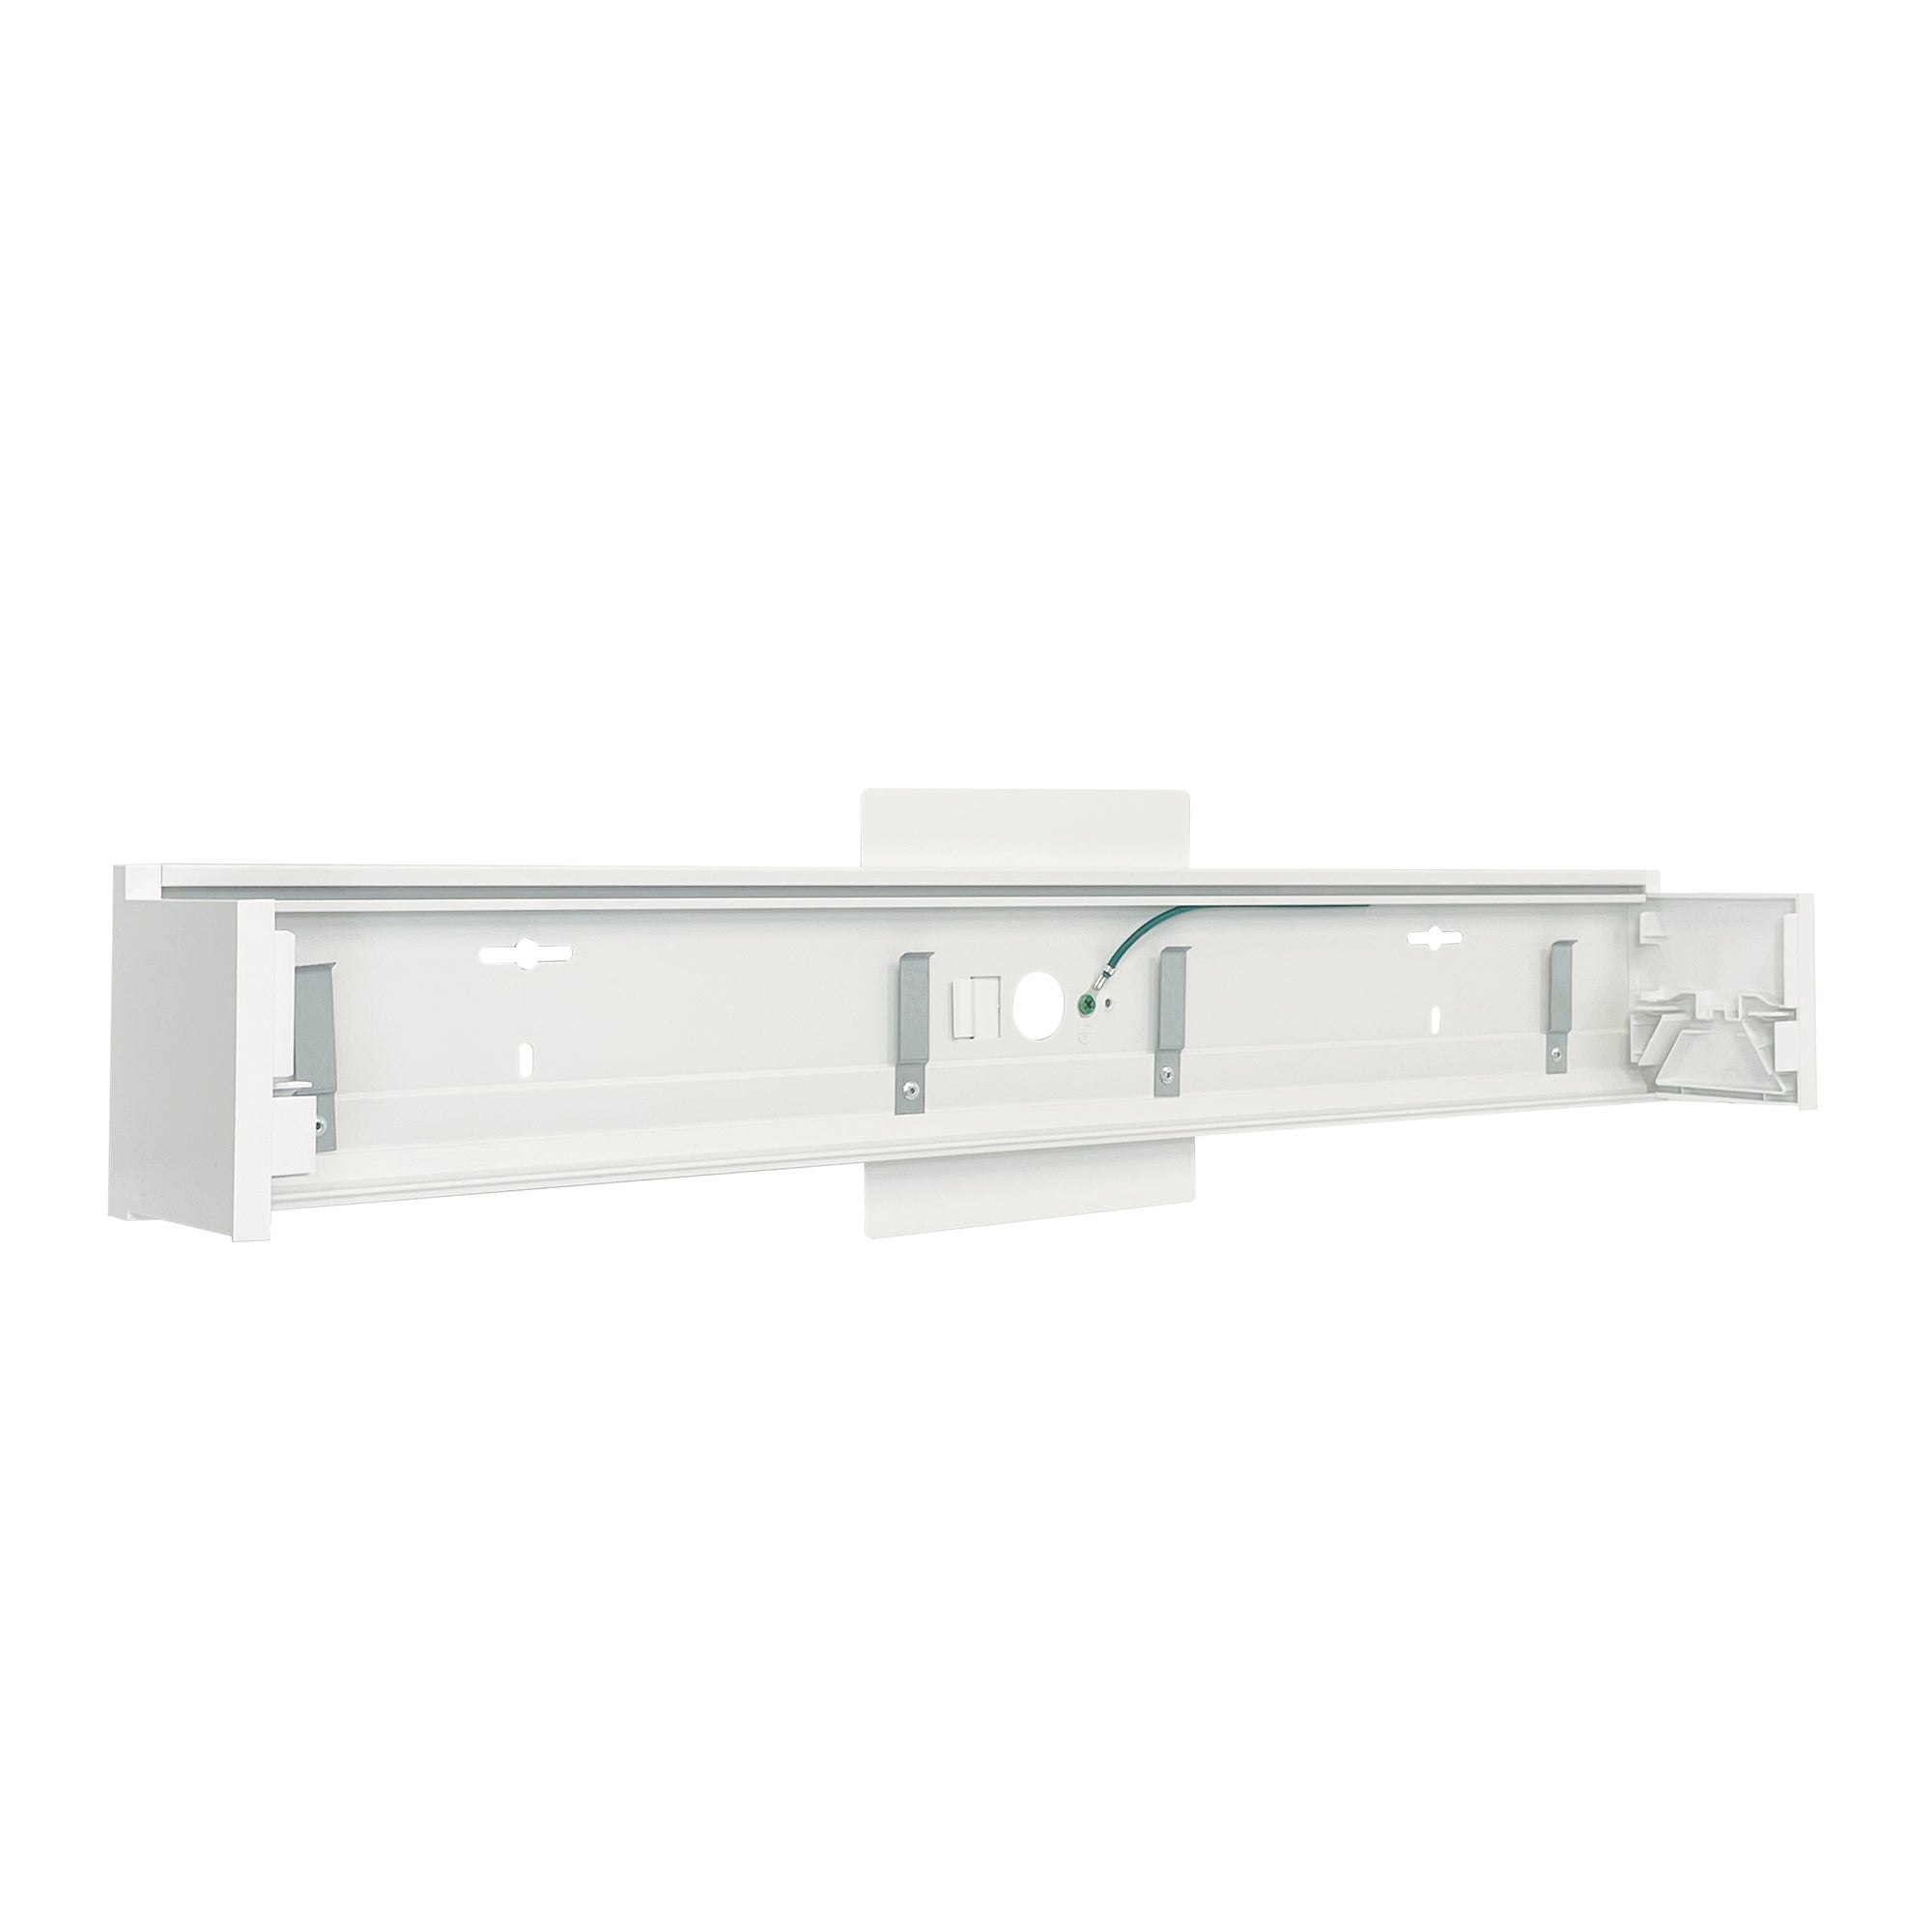 Nora Lighting NLUD-2WMW - Linear - 2' Wall Mount Kit for NLUD-2334, White Finish